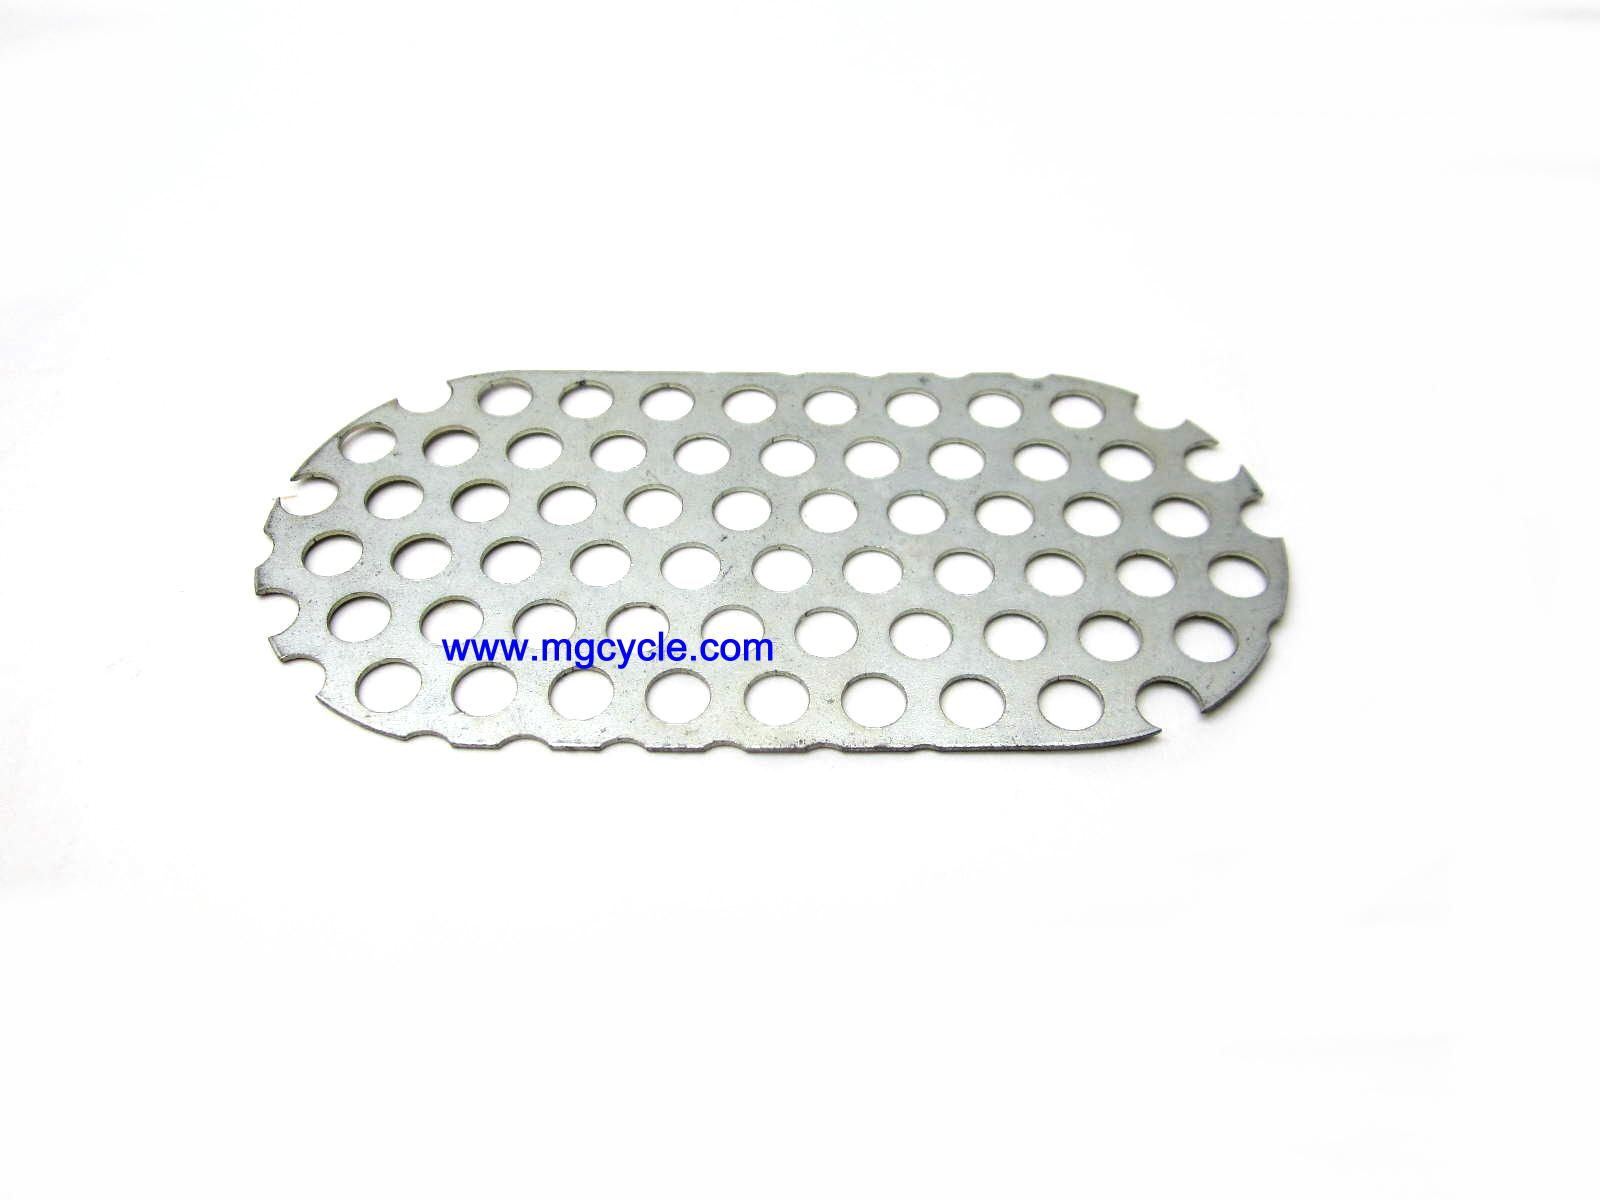 Filter screen for air intake plenum, V7 Sport 850T GU14114501 - Click Image to Close